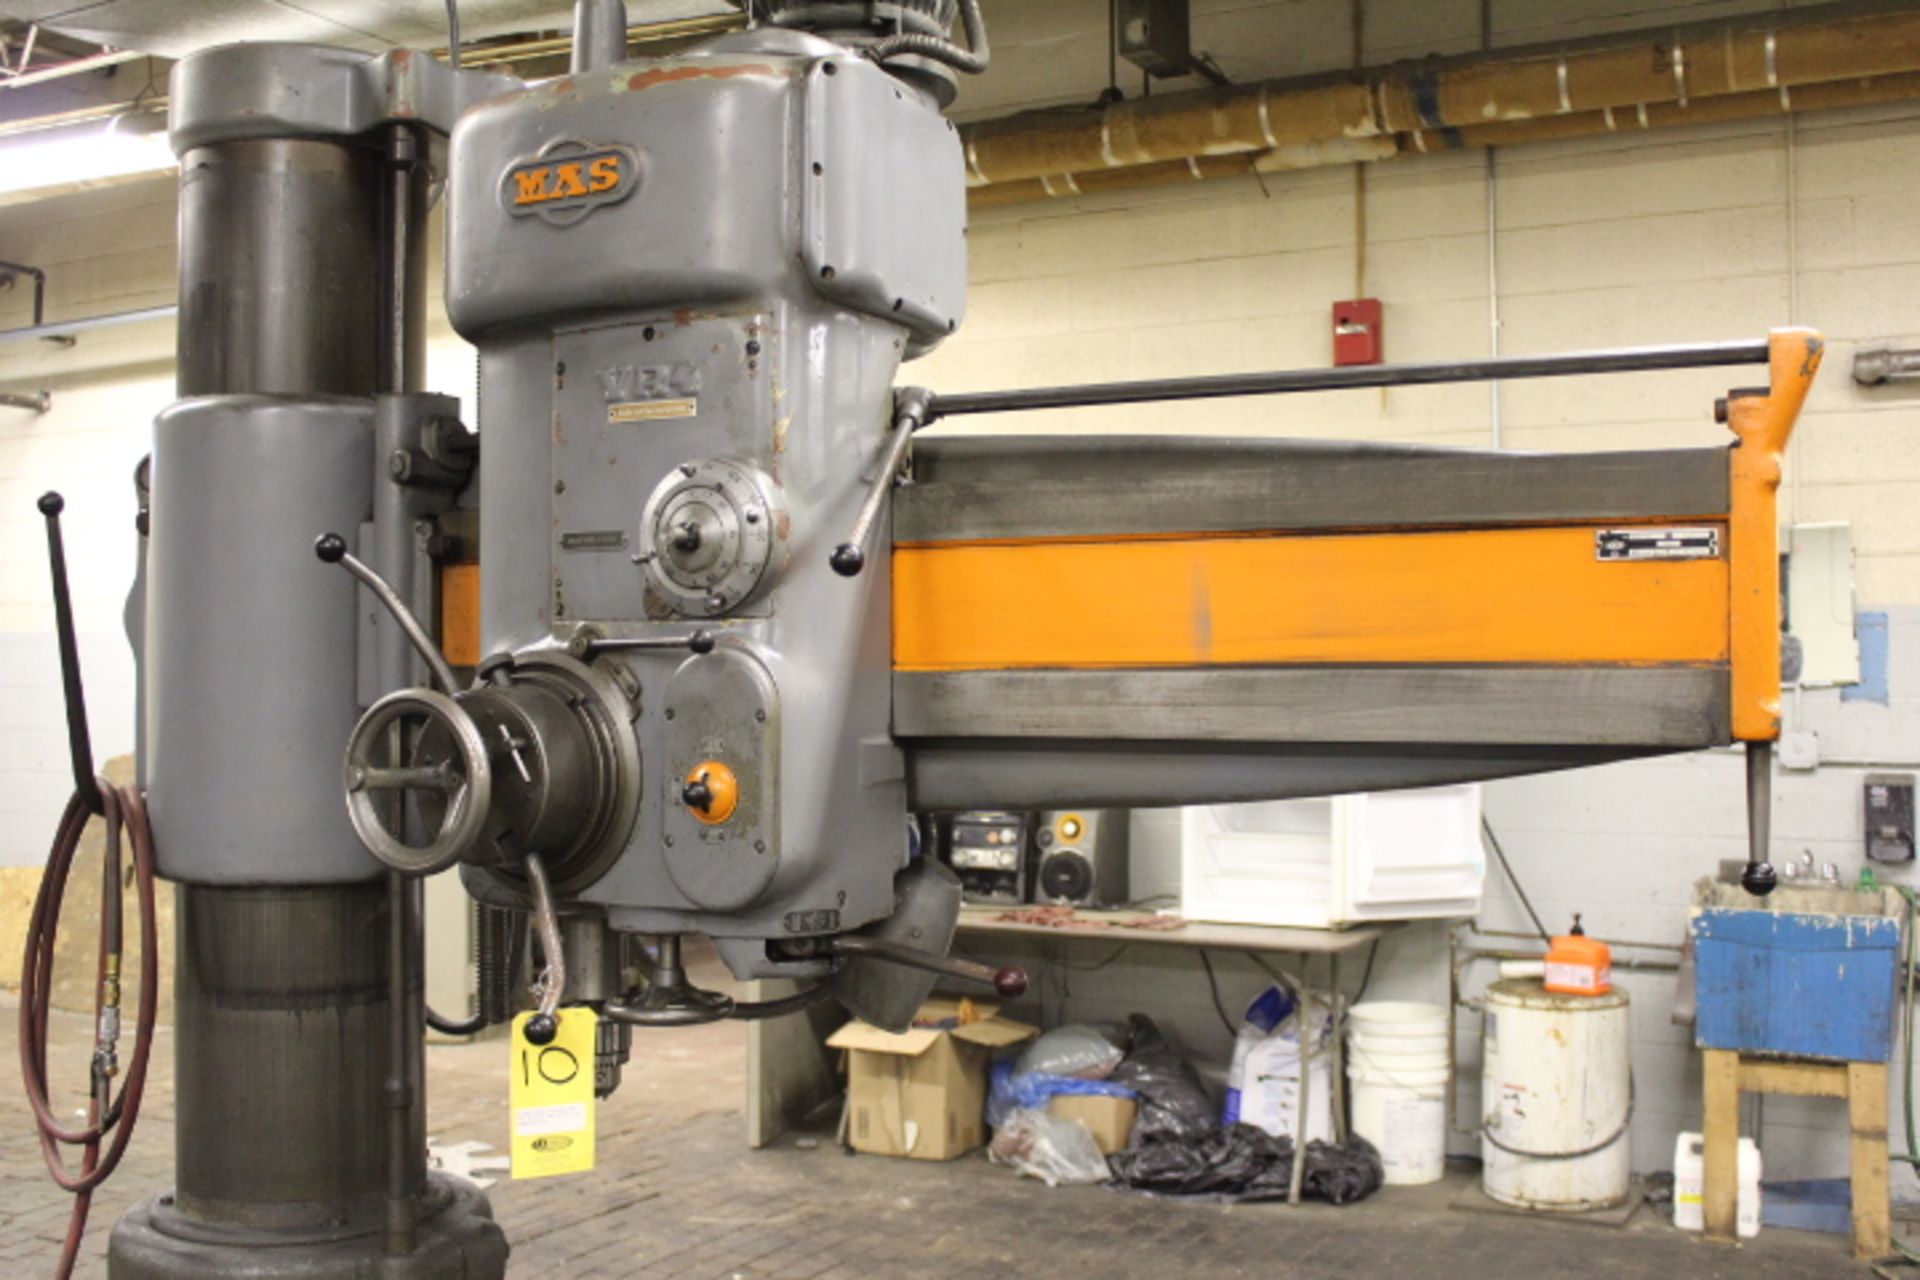 1965 TOS MAS VR4 RADIAL ARM DRILL, 22 X 22 IN BOX TABLE, 12 IN COL, 56 IN - Image 2 of 2